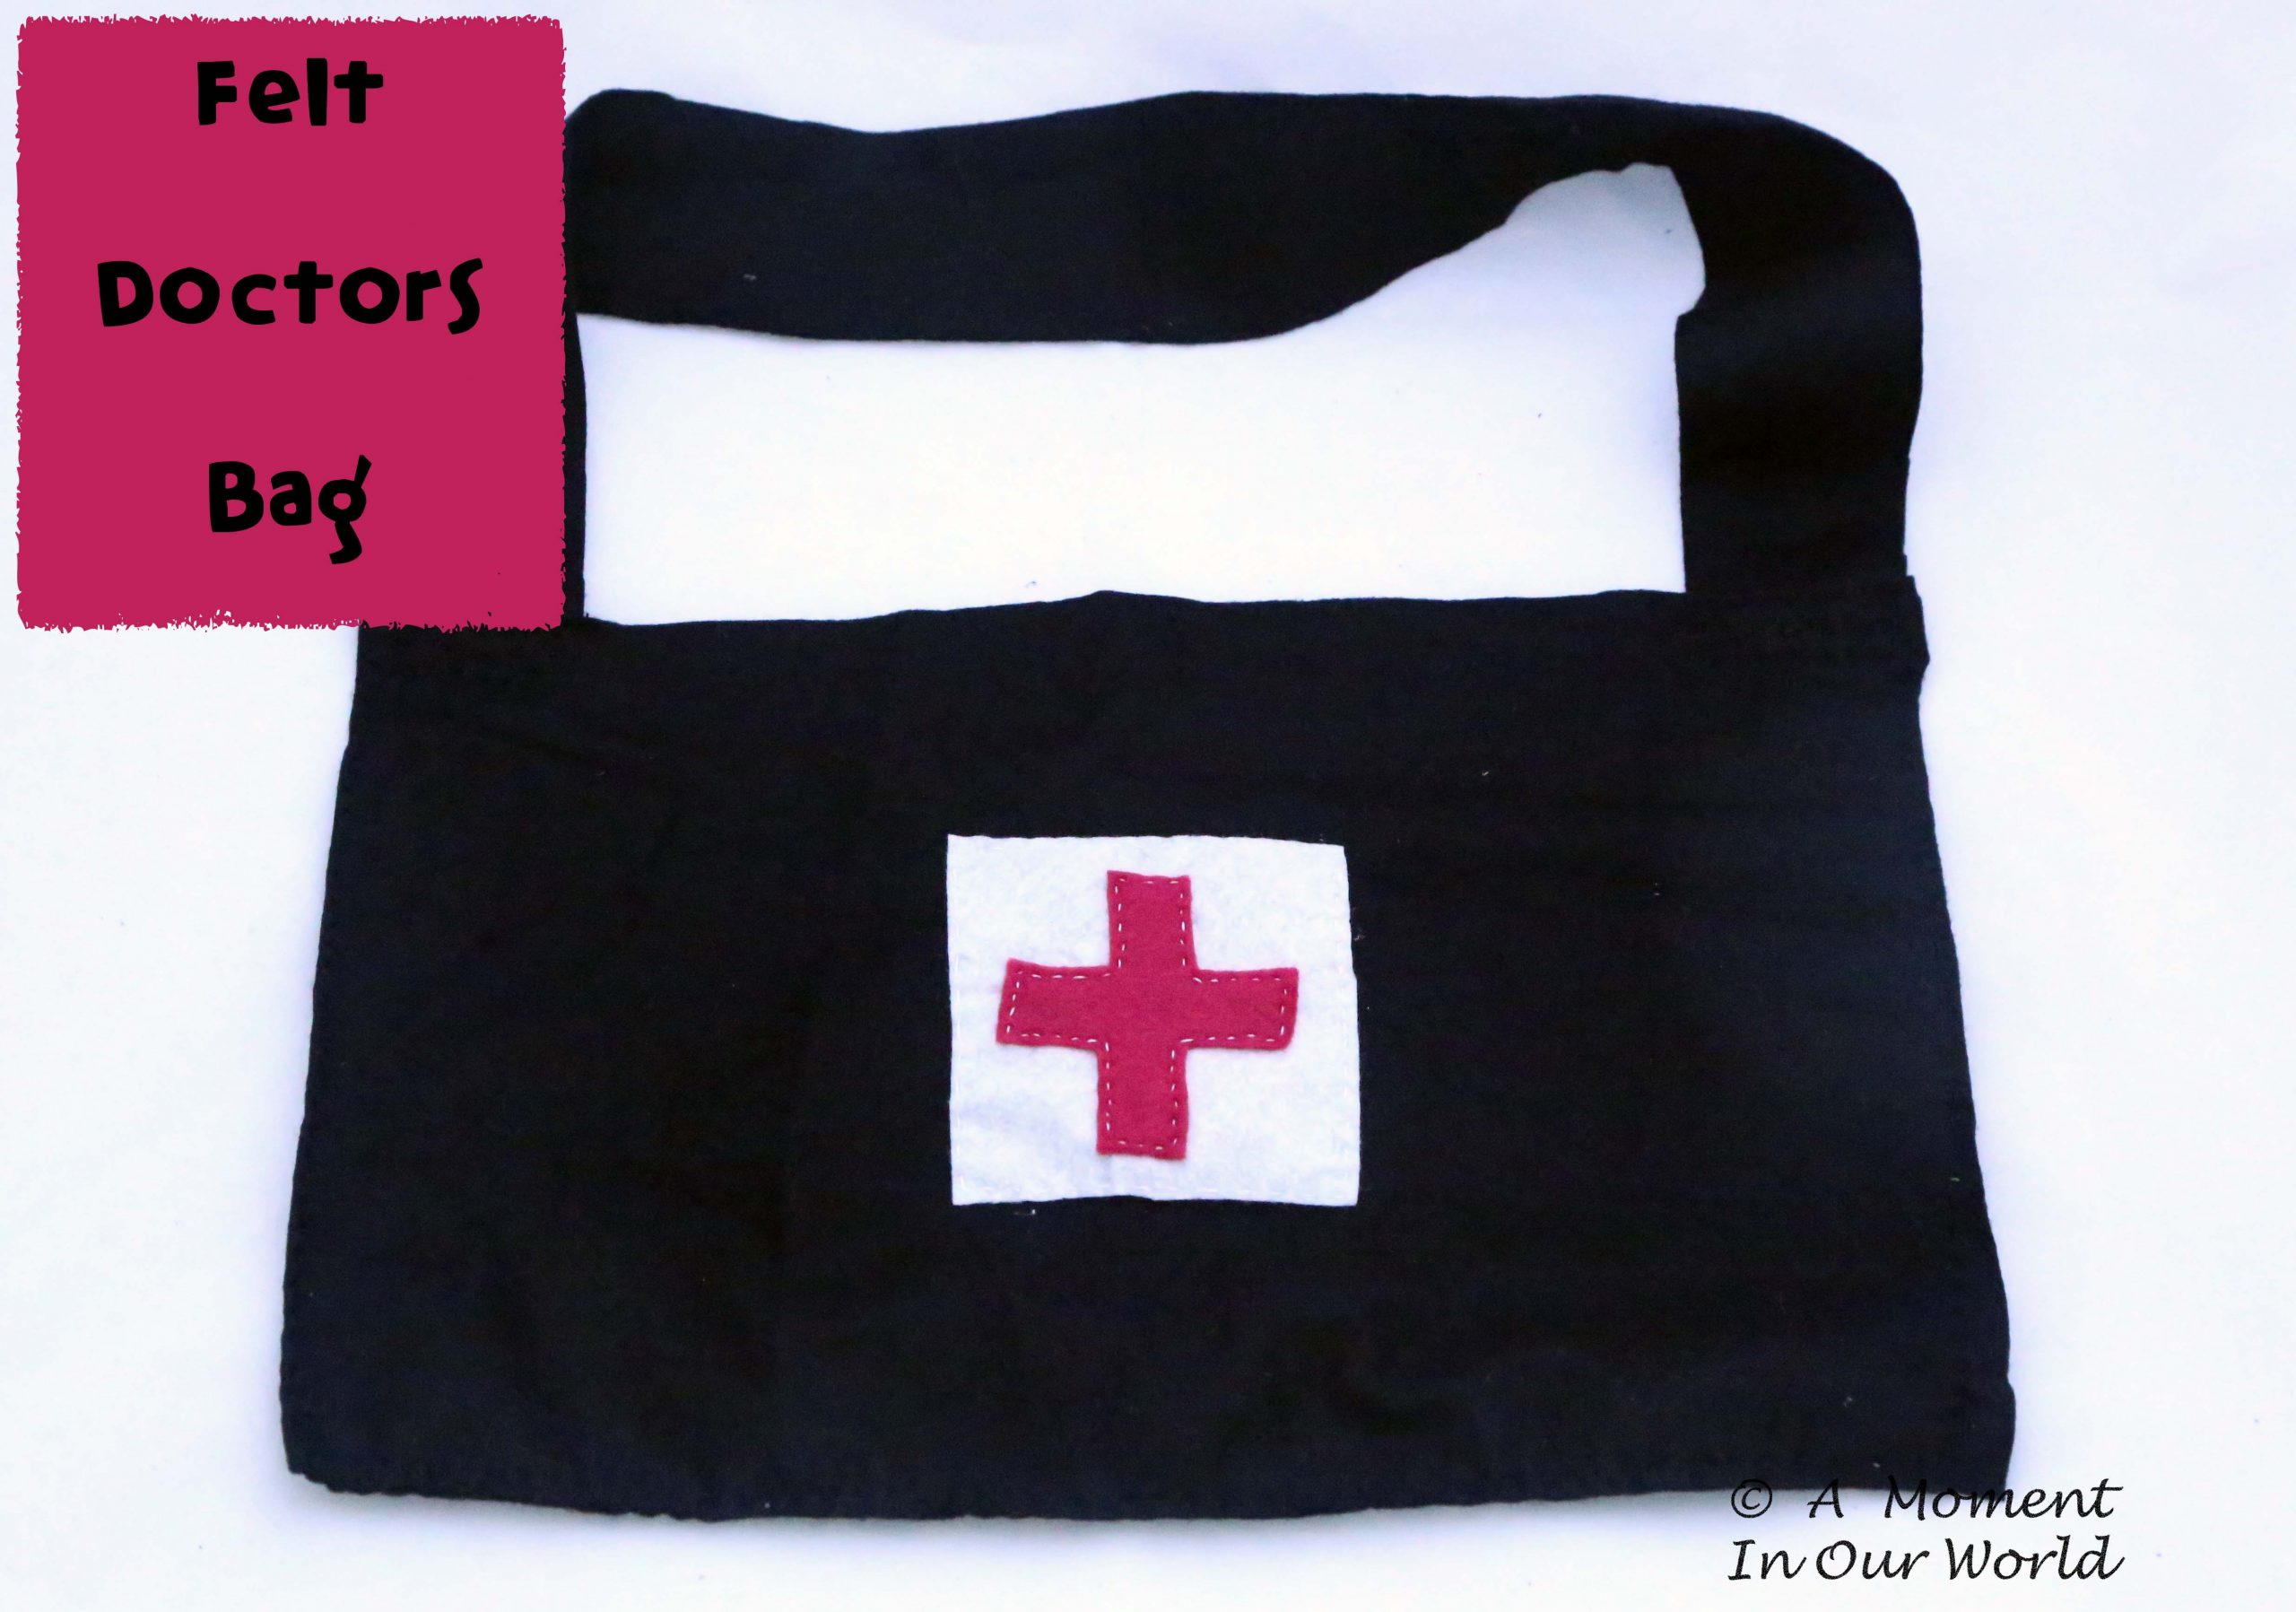 Have fun playing doctor's with this felt doctors bag.